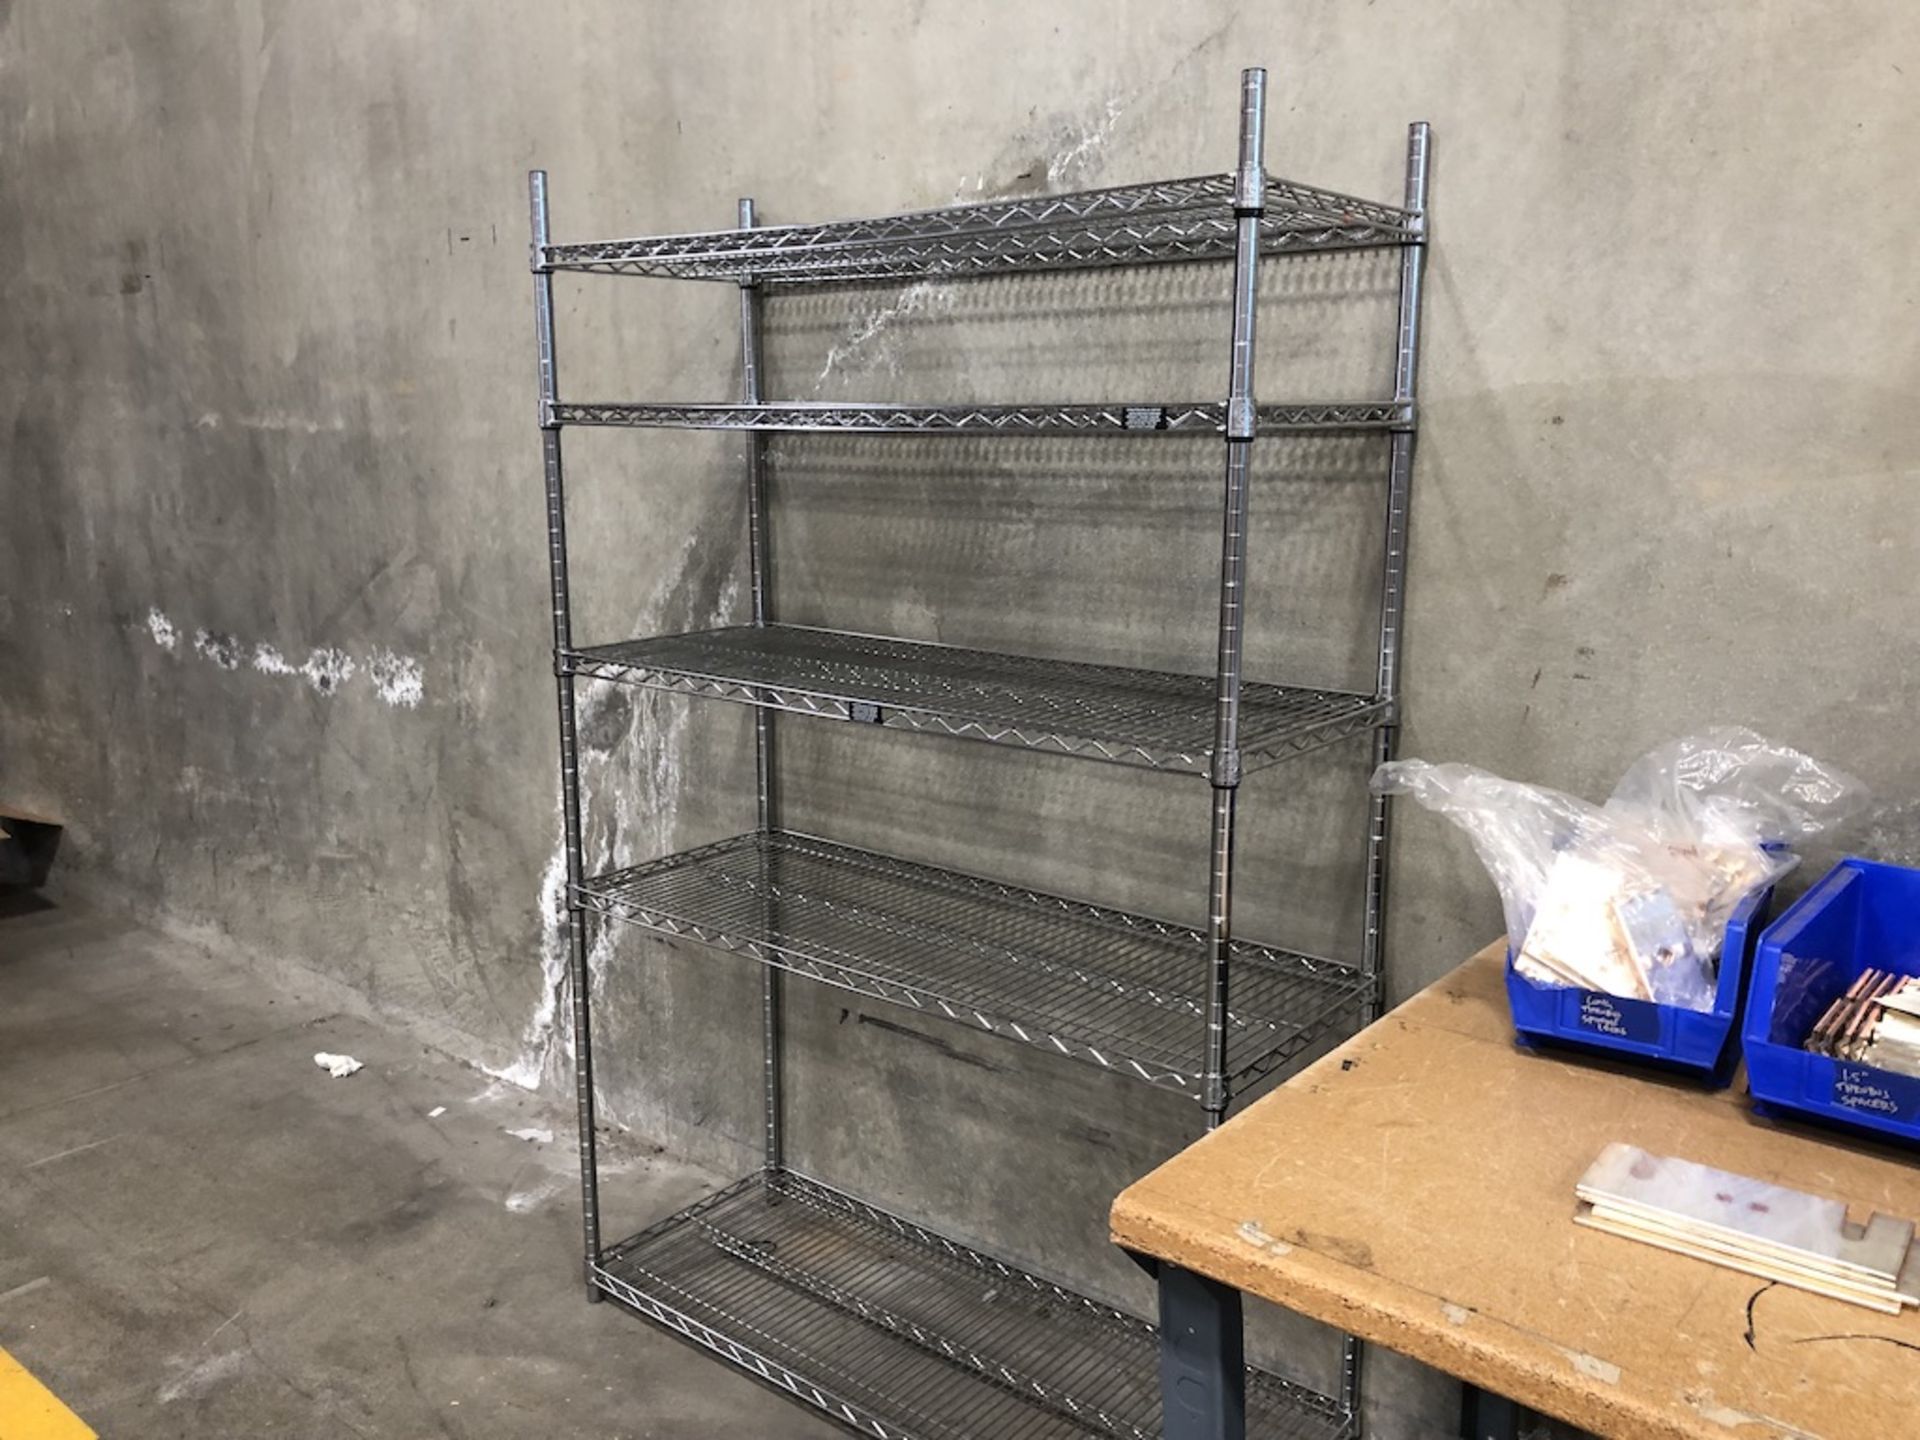 STEEL WIRE RACK 6FT H X 47IN L X 18IN W   SCHNEIDER ELECTRIC- 6611 PRESTON AVE SUITE A - Image 3 of 3